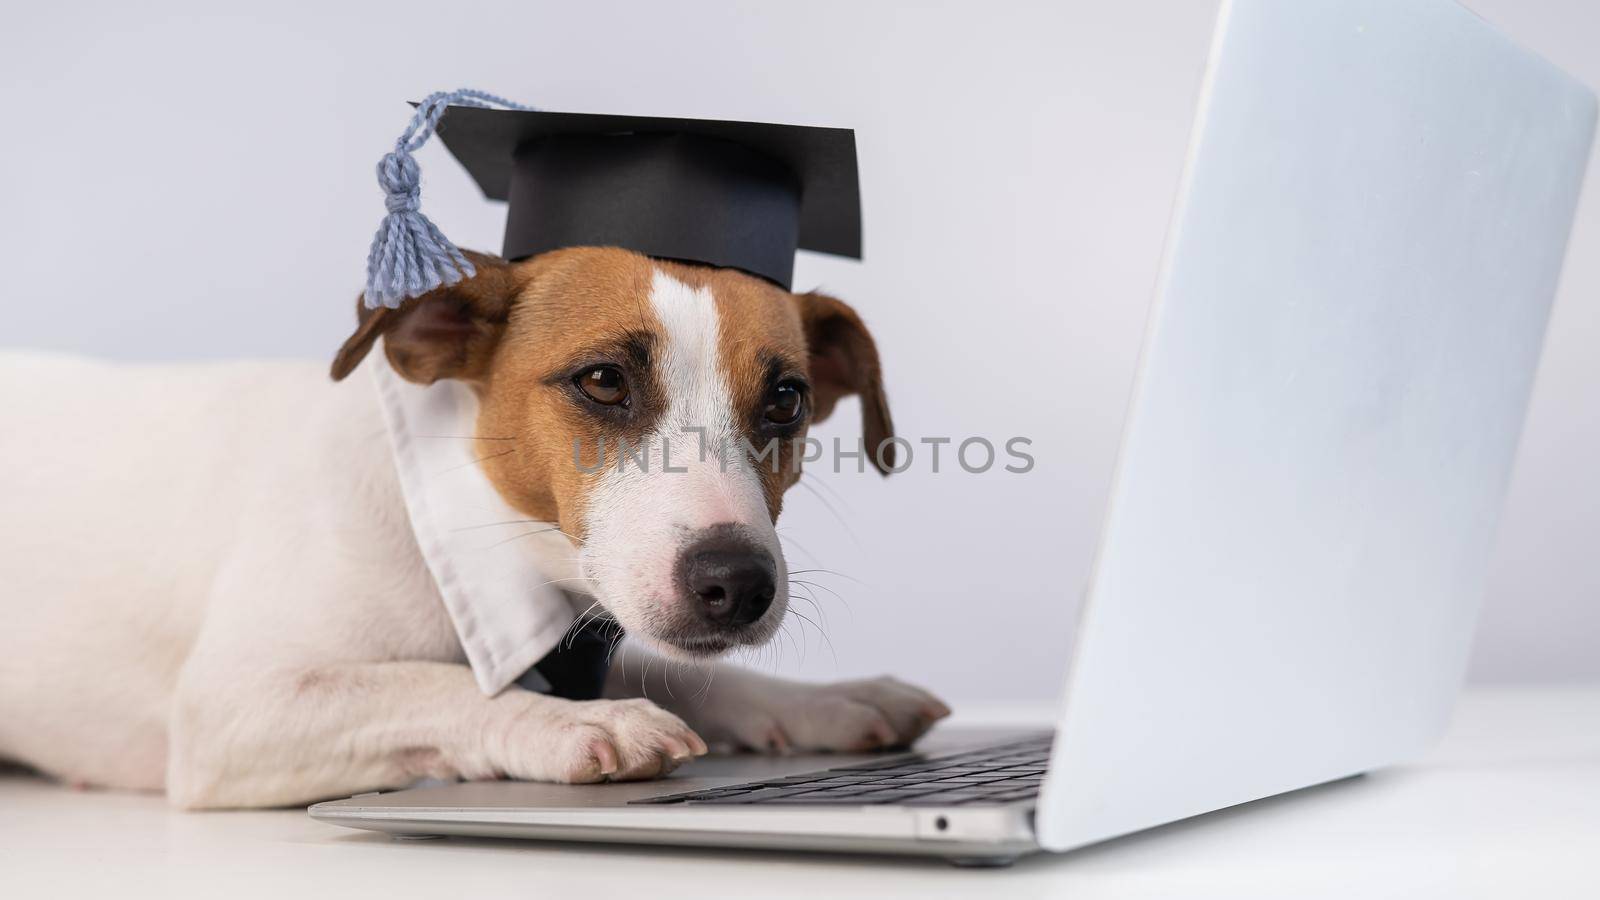 Jack Russell Terrier dog dressed in a tie and an academic cap works at a laptop on a white background